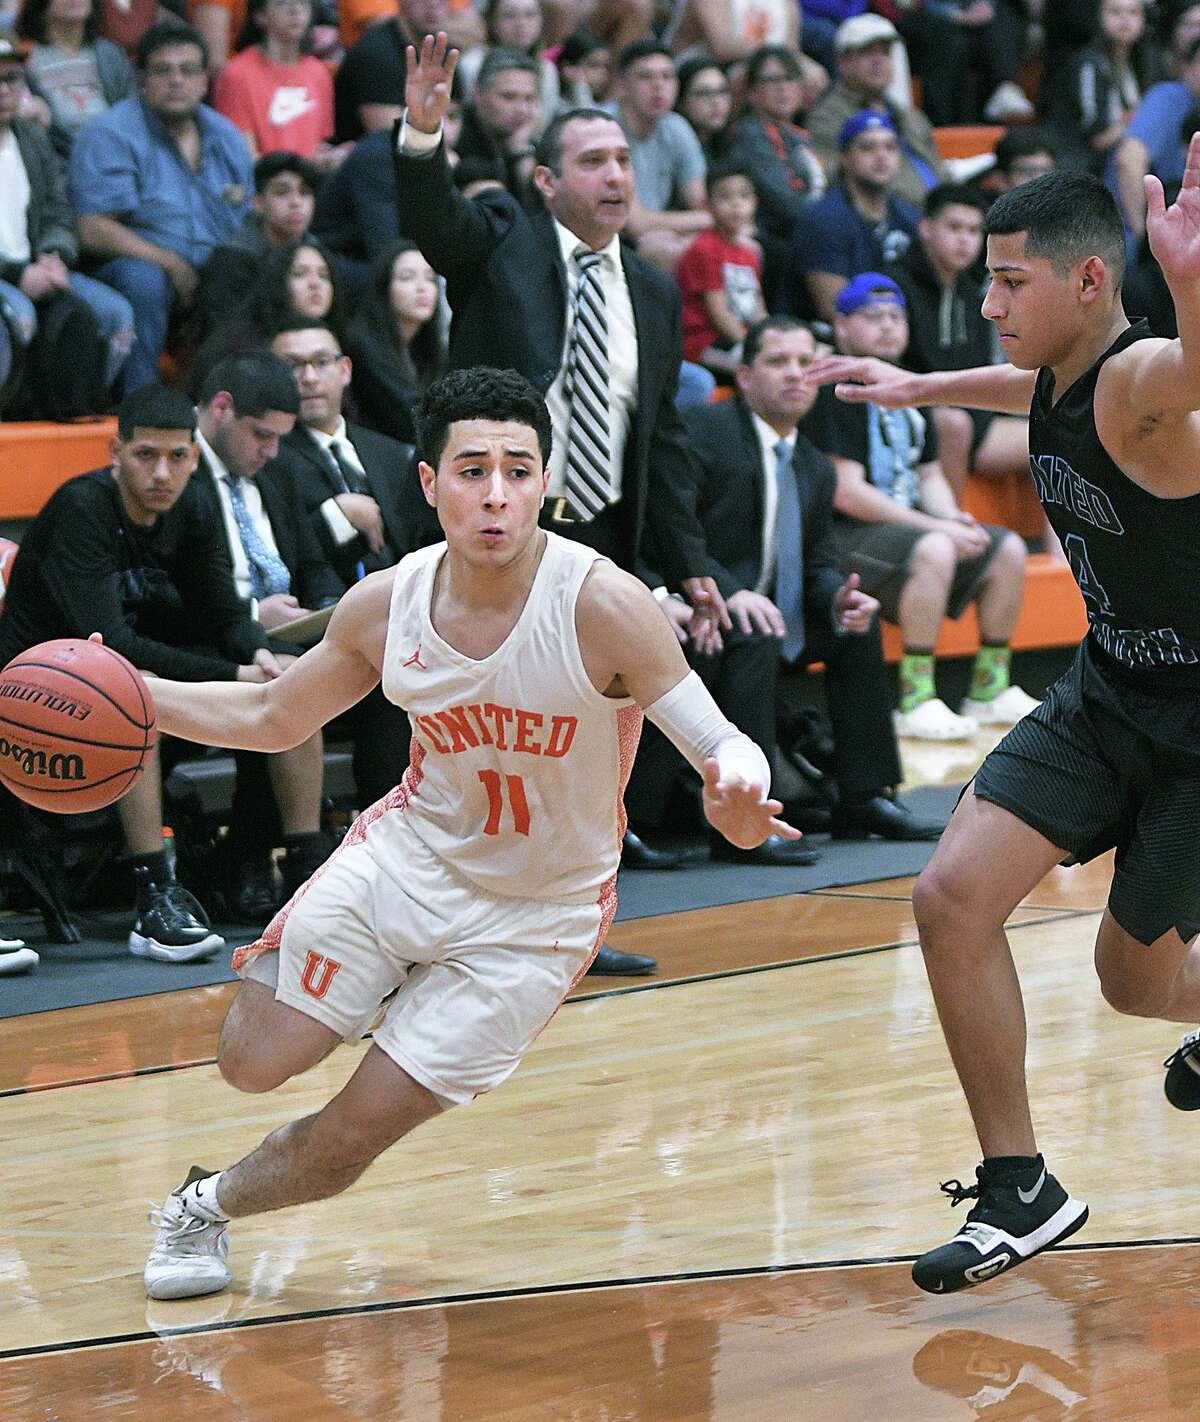 United seniors Carlos Guzman, left, and Alex Idrogo, right, have helped the Longhorns contend for a title with a 9-1 record in District 29-6A heading into the final two games. UHS hosts Eagle Pass at 7:30 p.m. Friday.